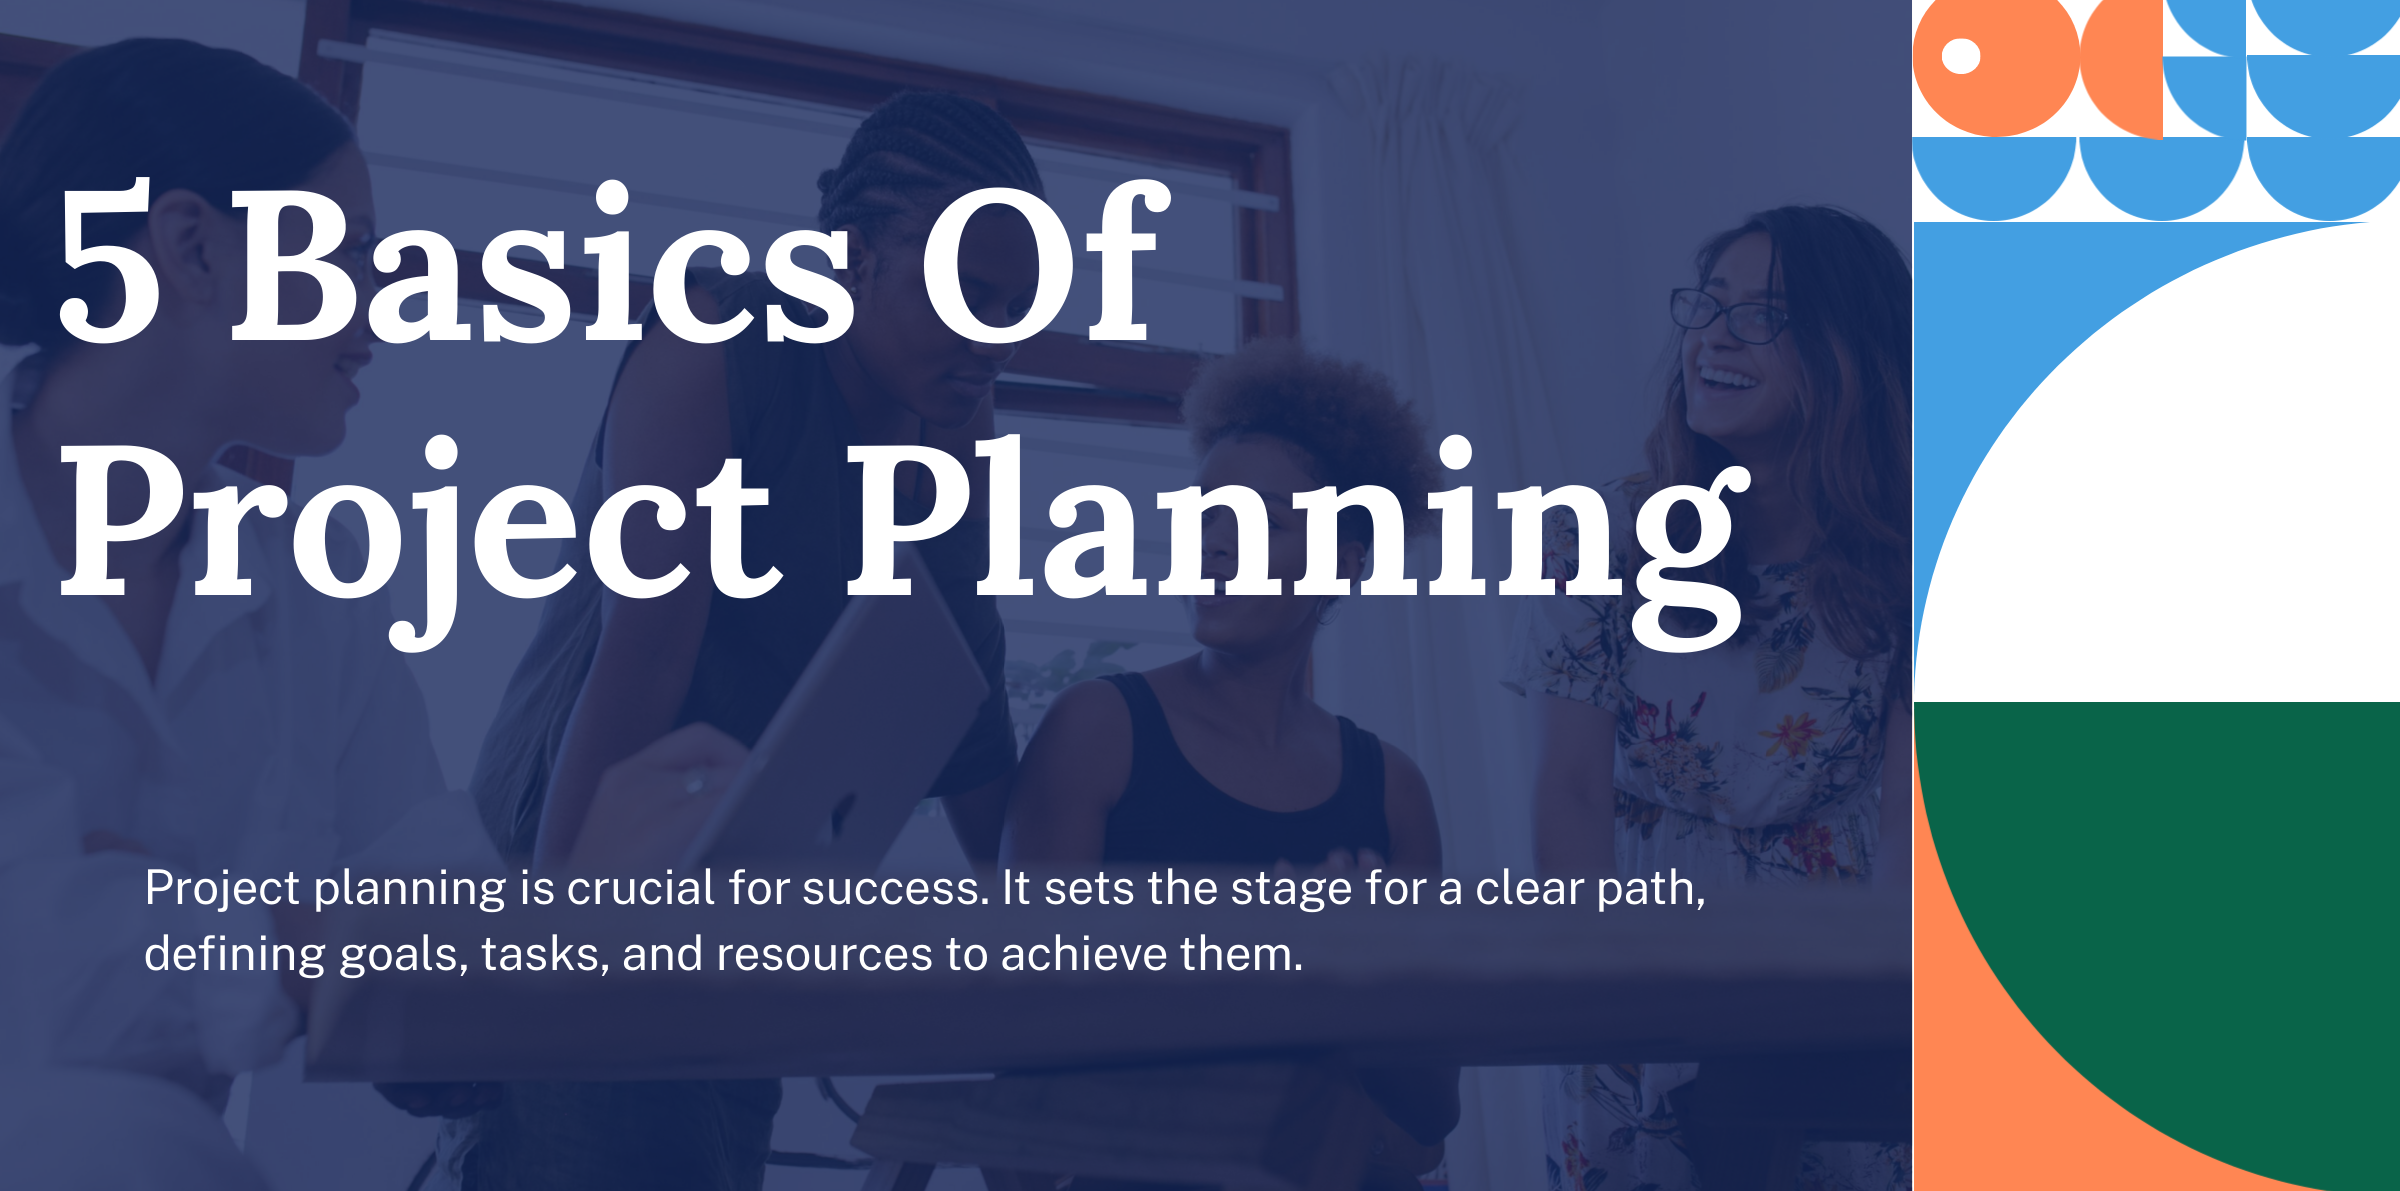 5 Basics Of Project Planning Feature